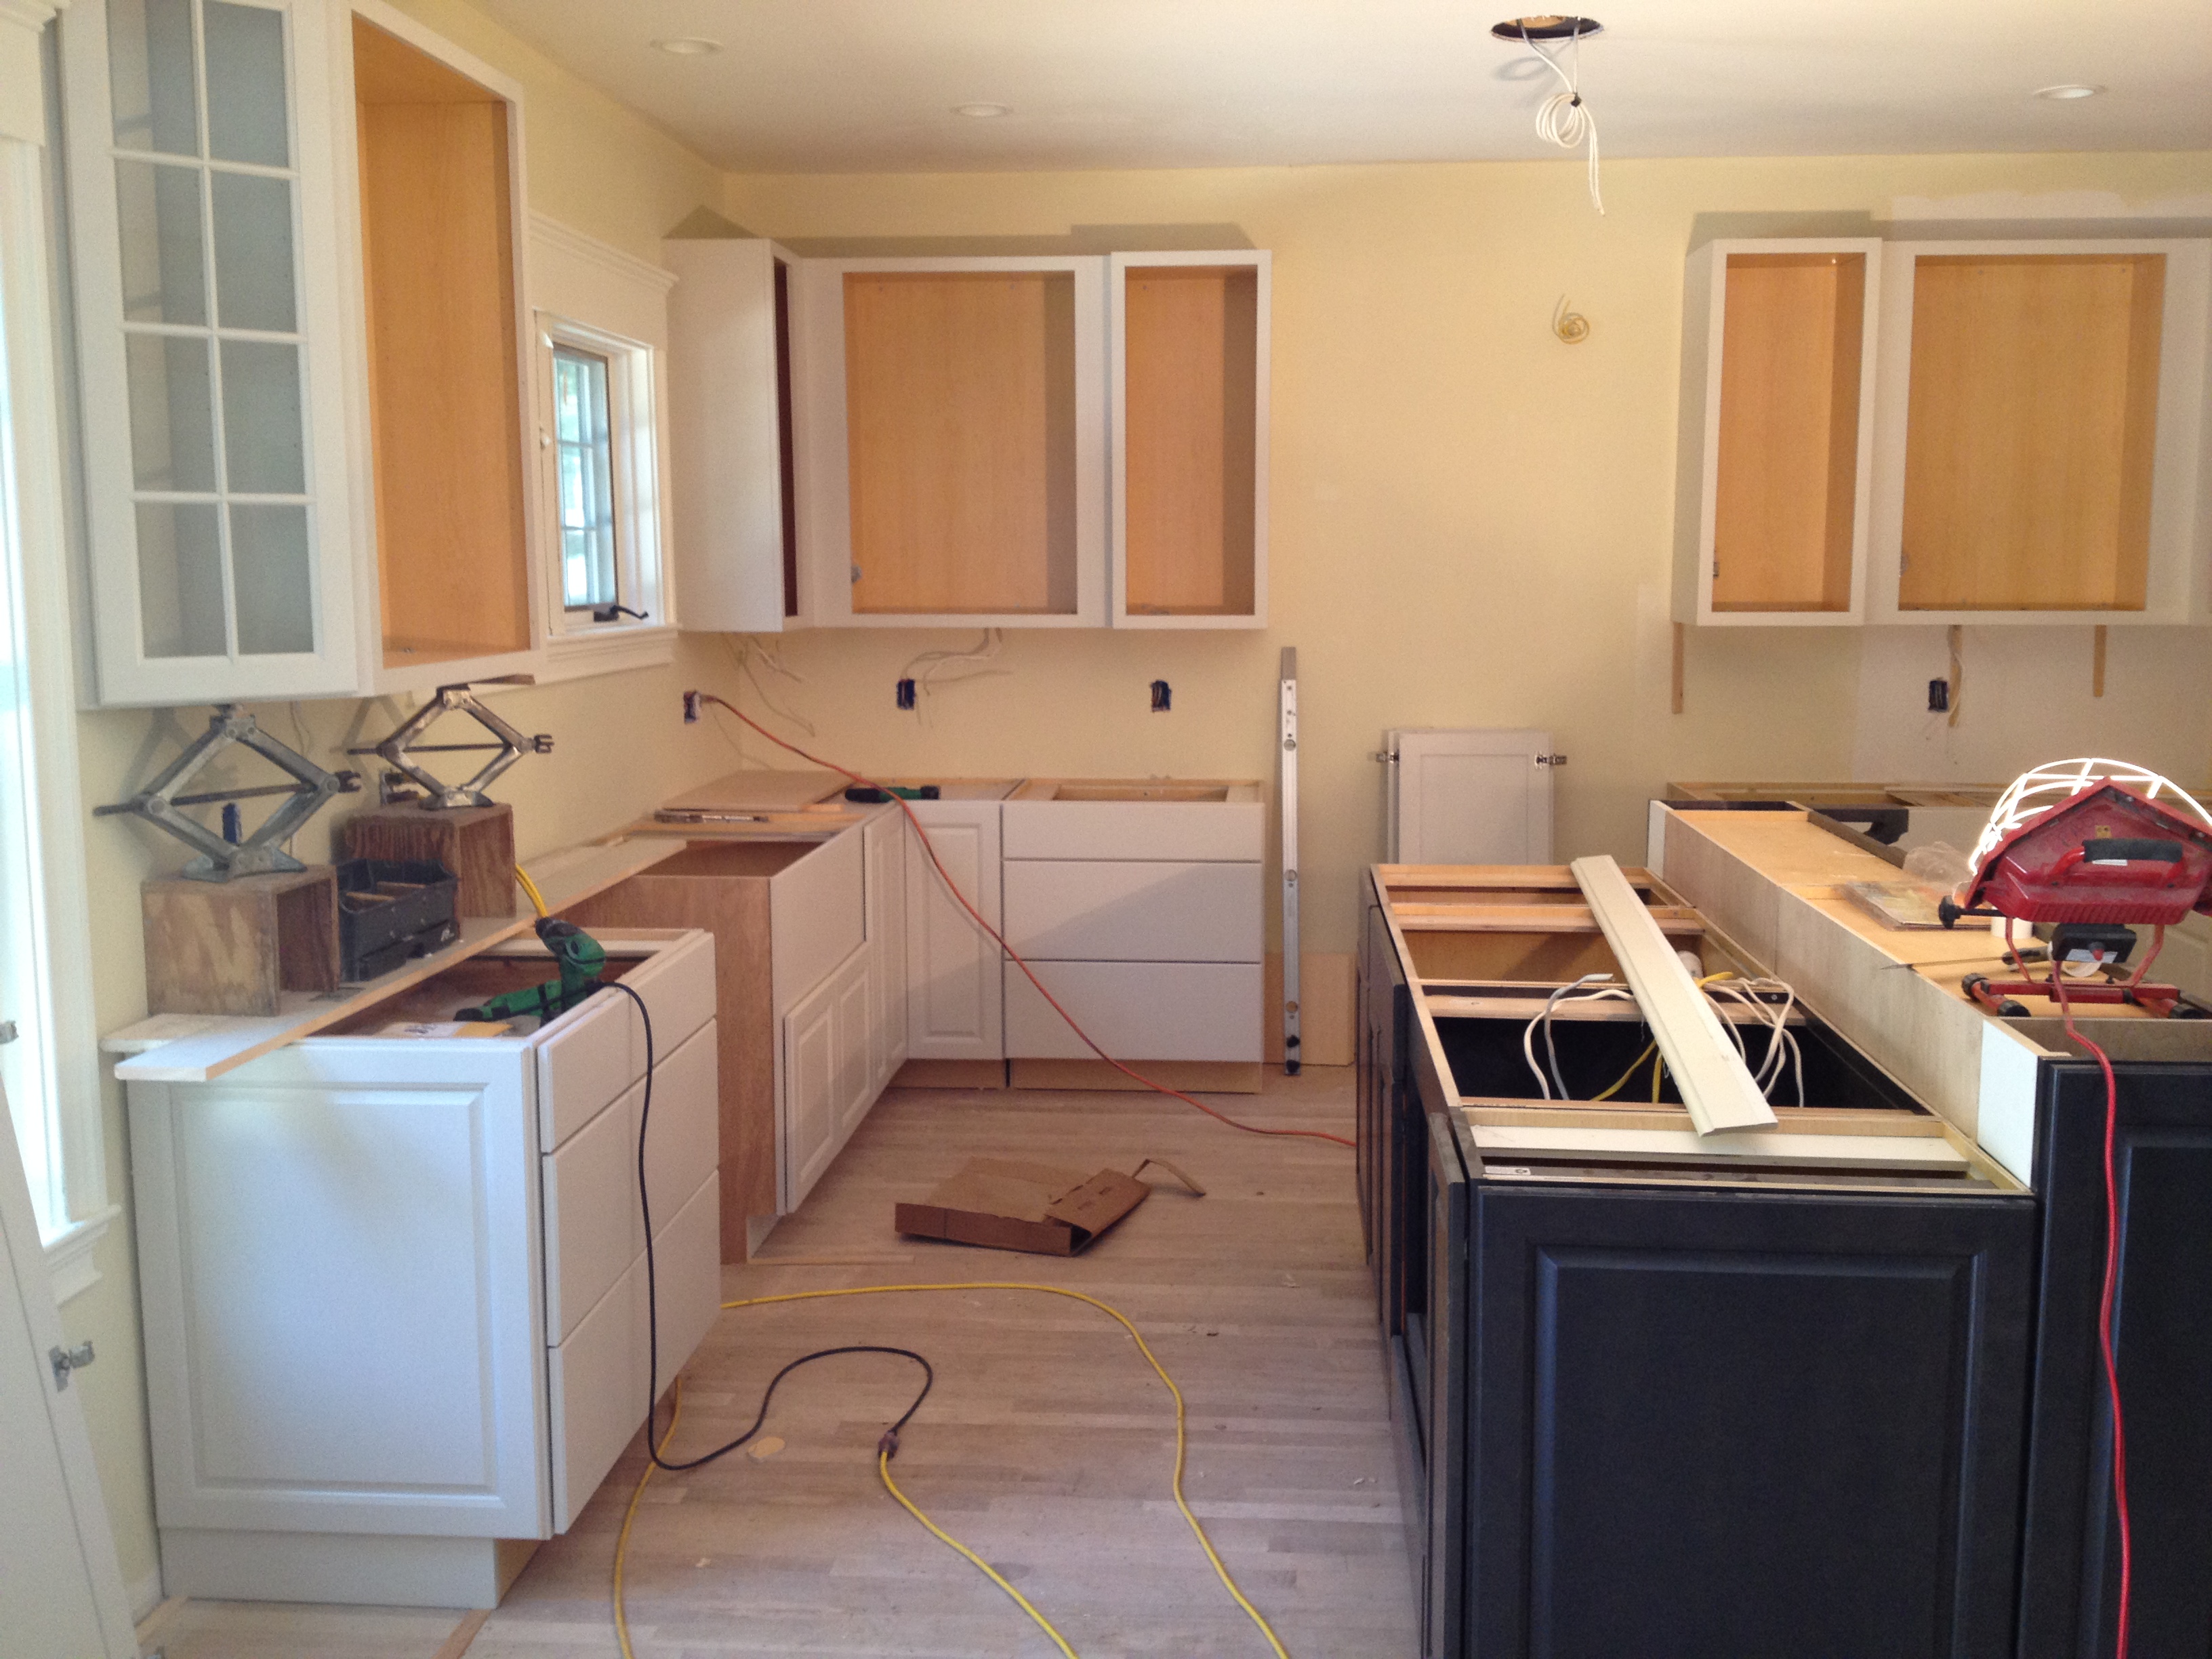 Upper Cabinets in Place